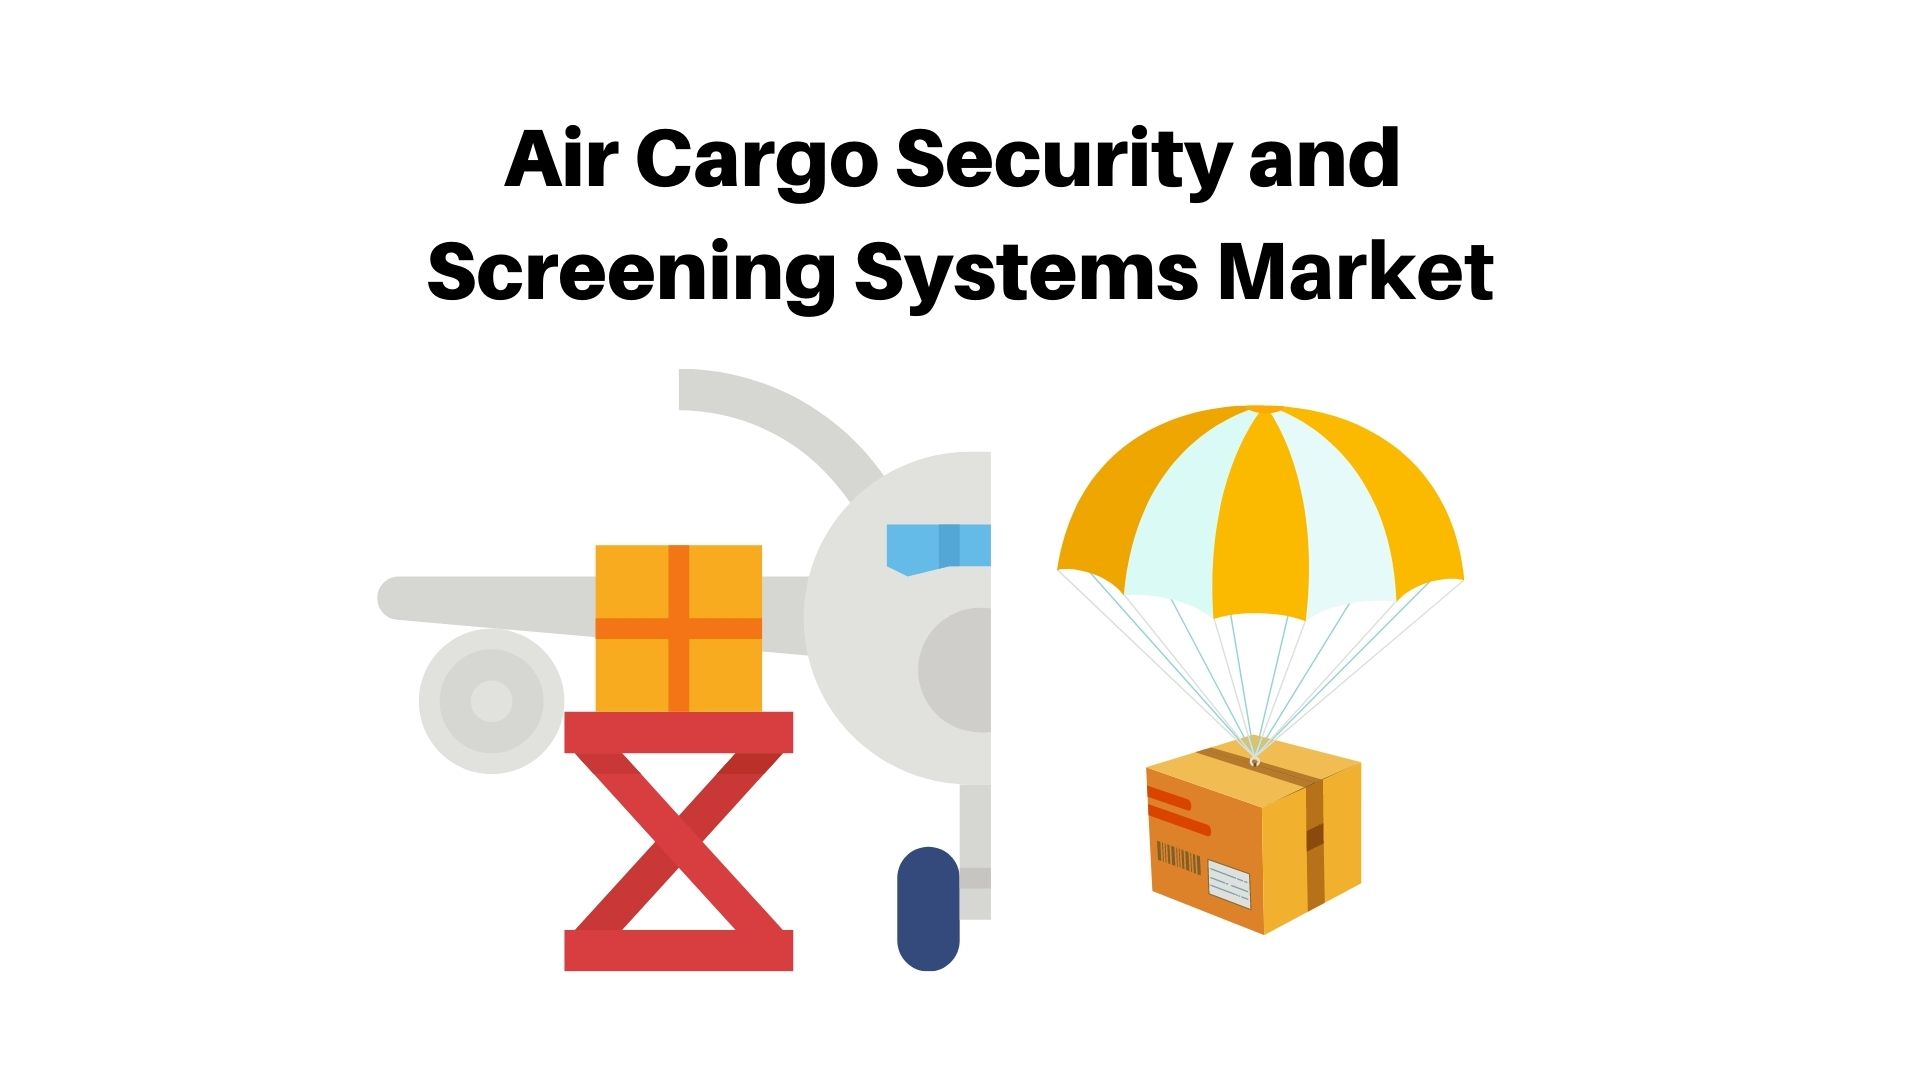 Air Cargo Security and Screening Systems Market is Estimated to Showcase Significant Growth of USD 1.28 Bn in 2032 With a CAGR 4.8%